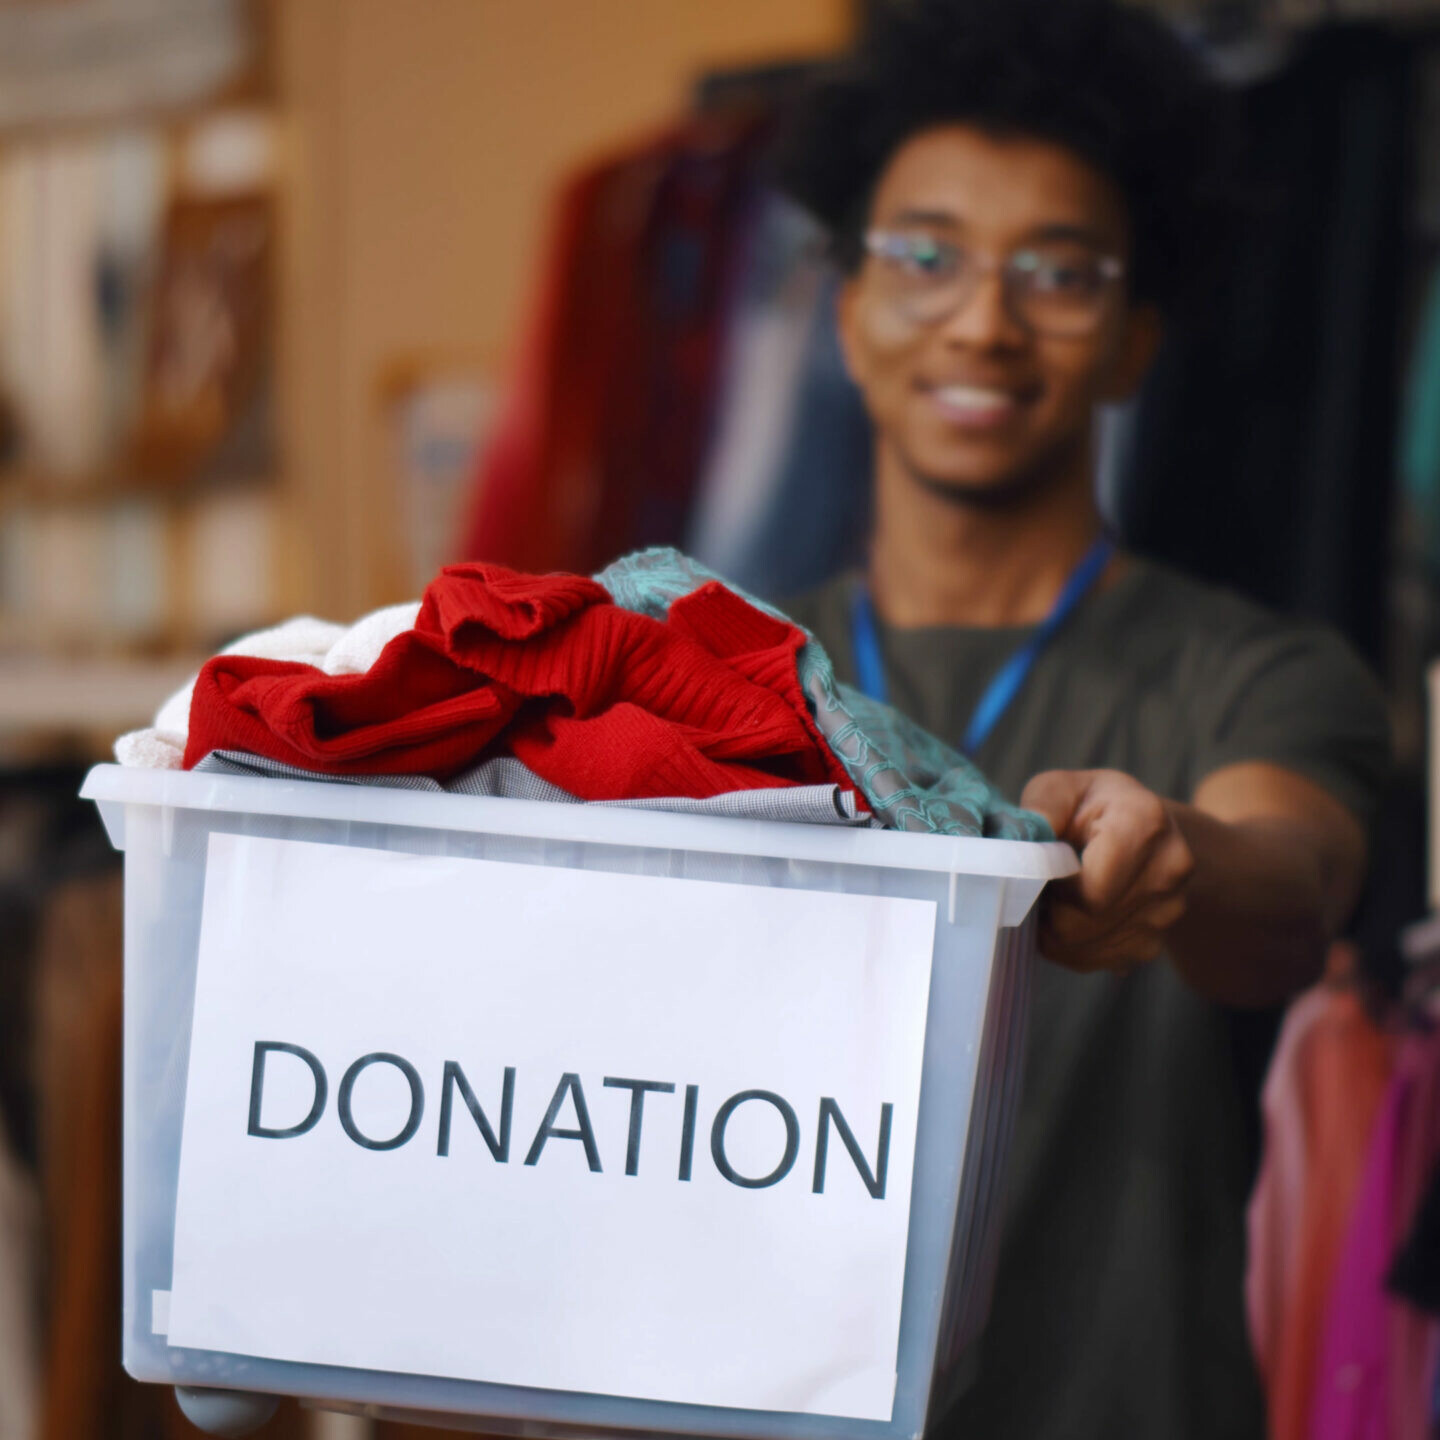 Man donating clothing in a box that says 